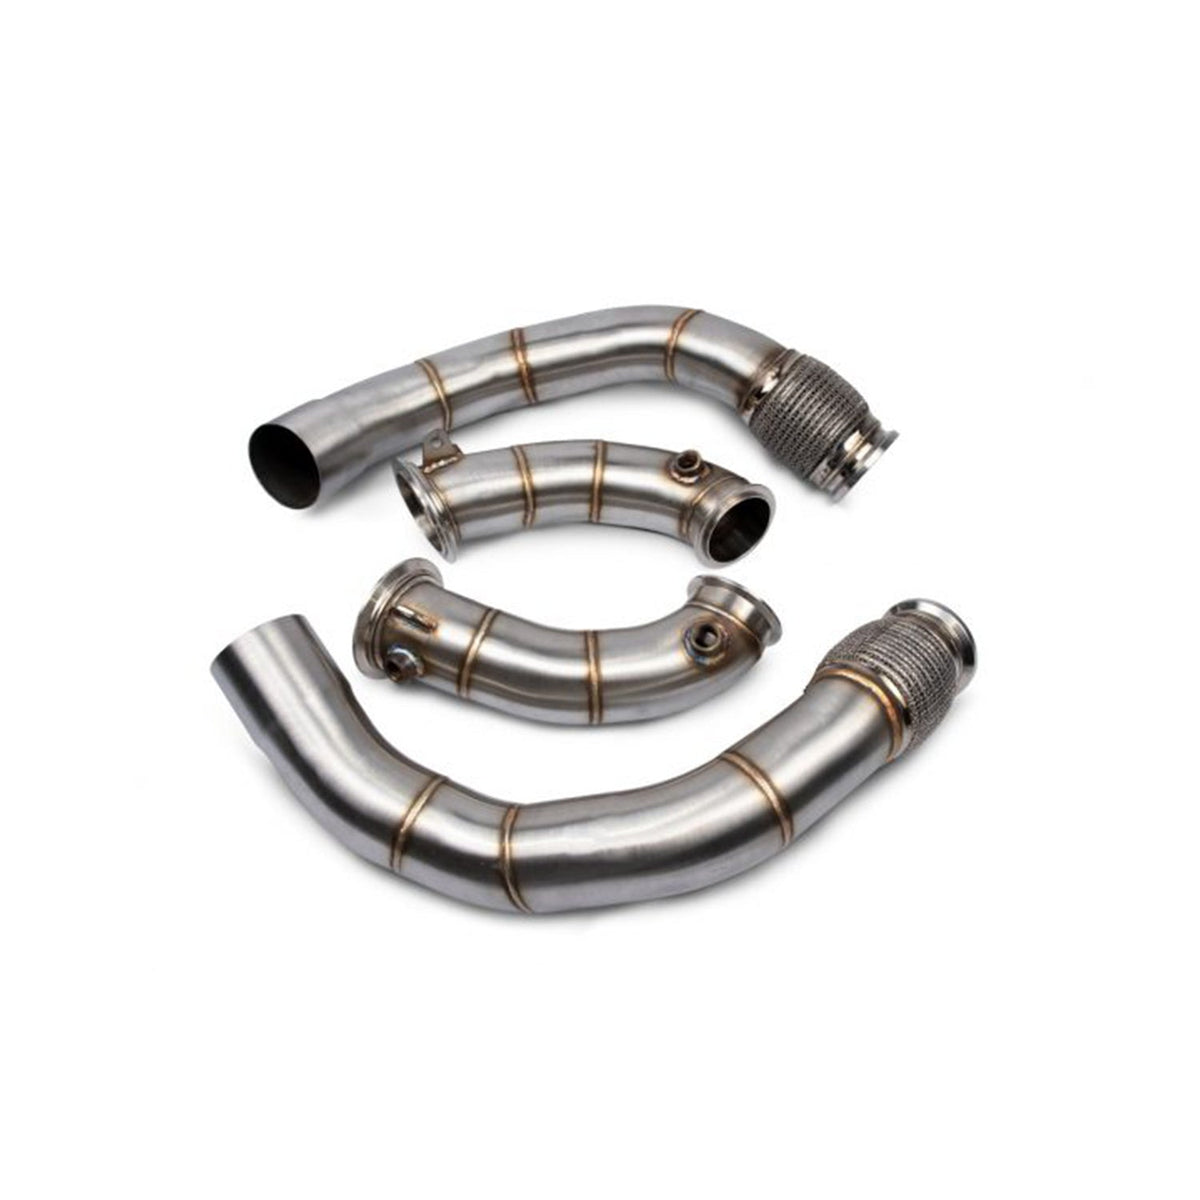 VRSF Stainless Steel Race Downpipes for 2018 – 2021 BMW M5 & M8 F90 F91 F92 F93 S63R-R44 Performance